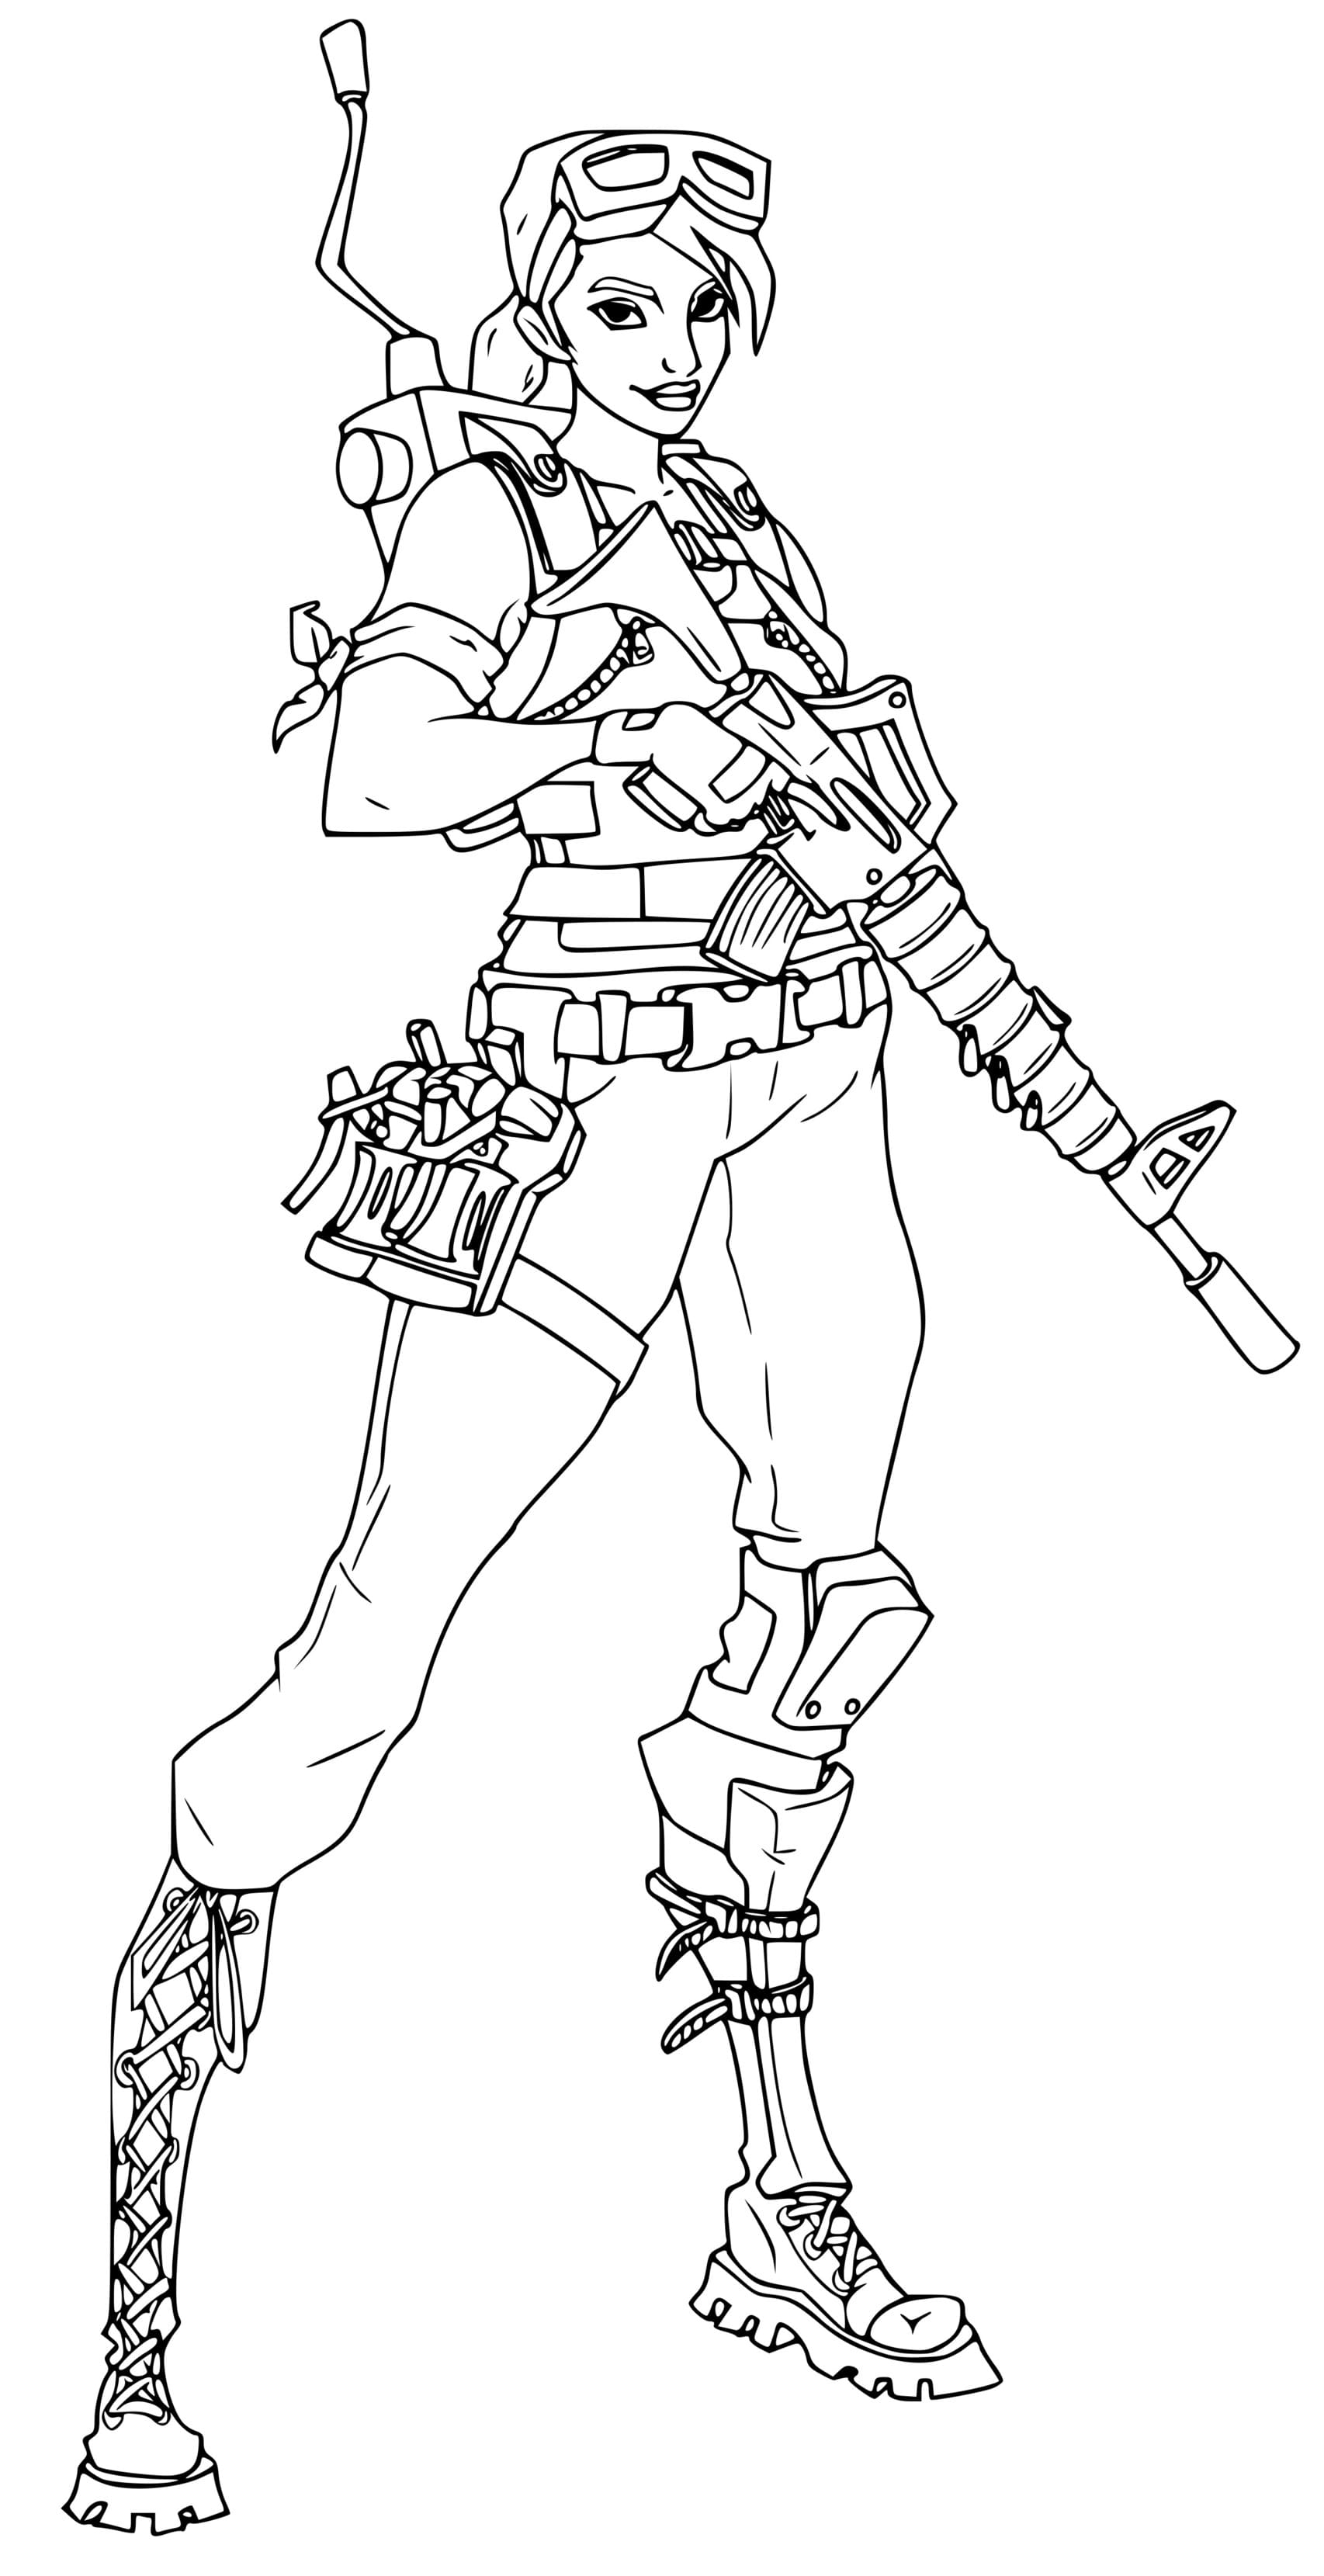 The Brite Bomber Coloring Page